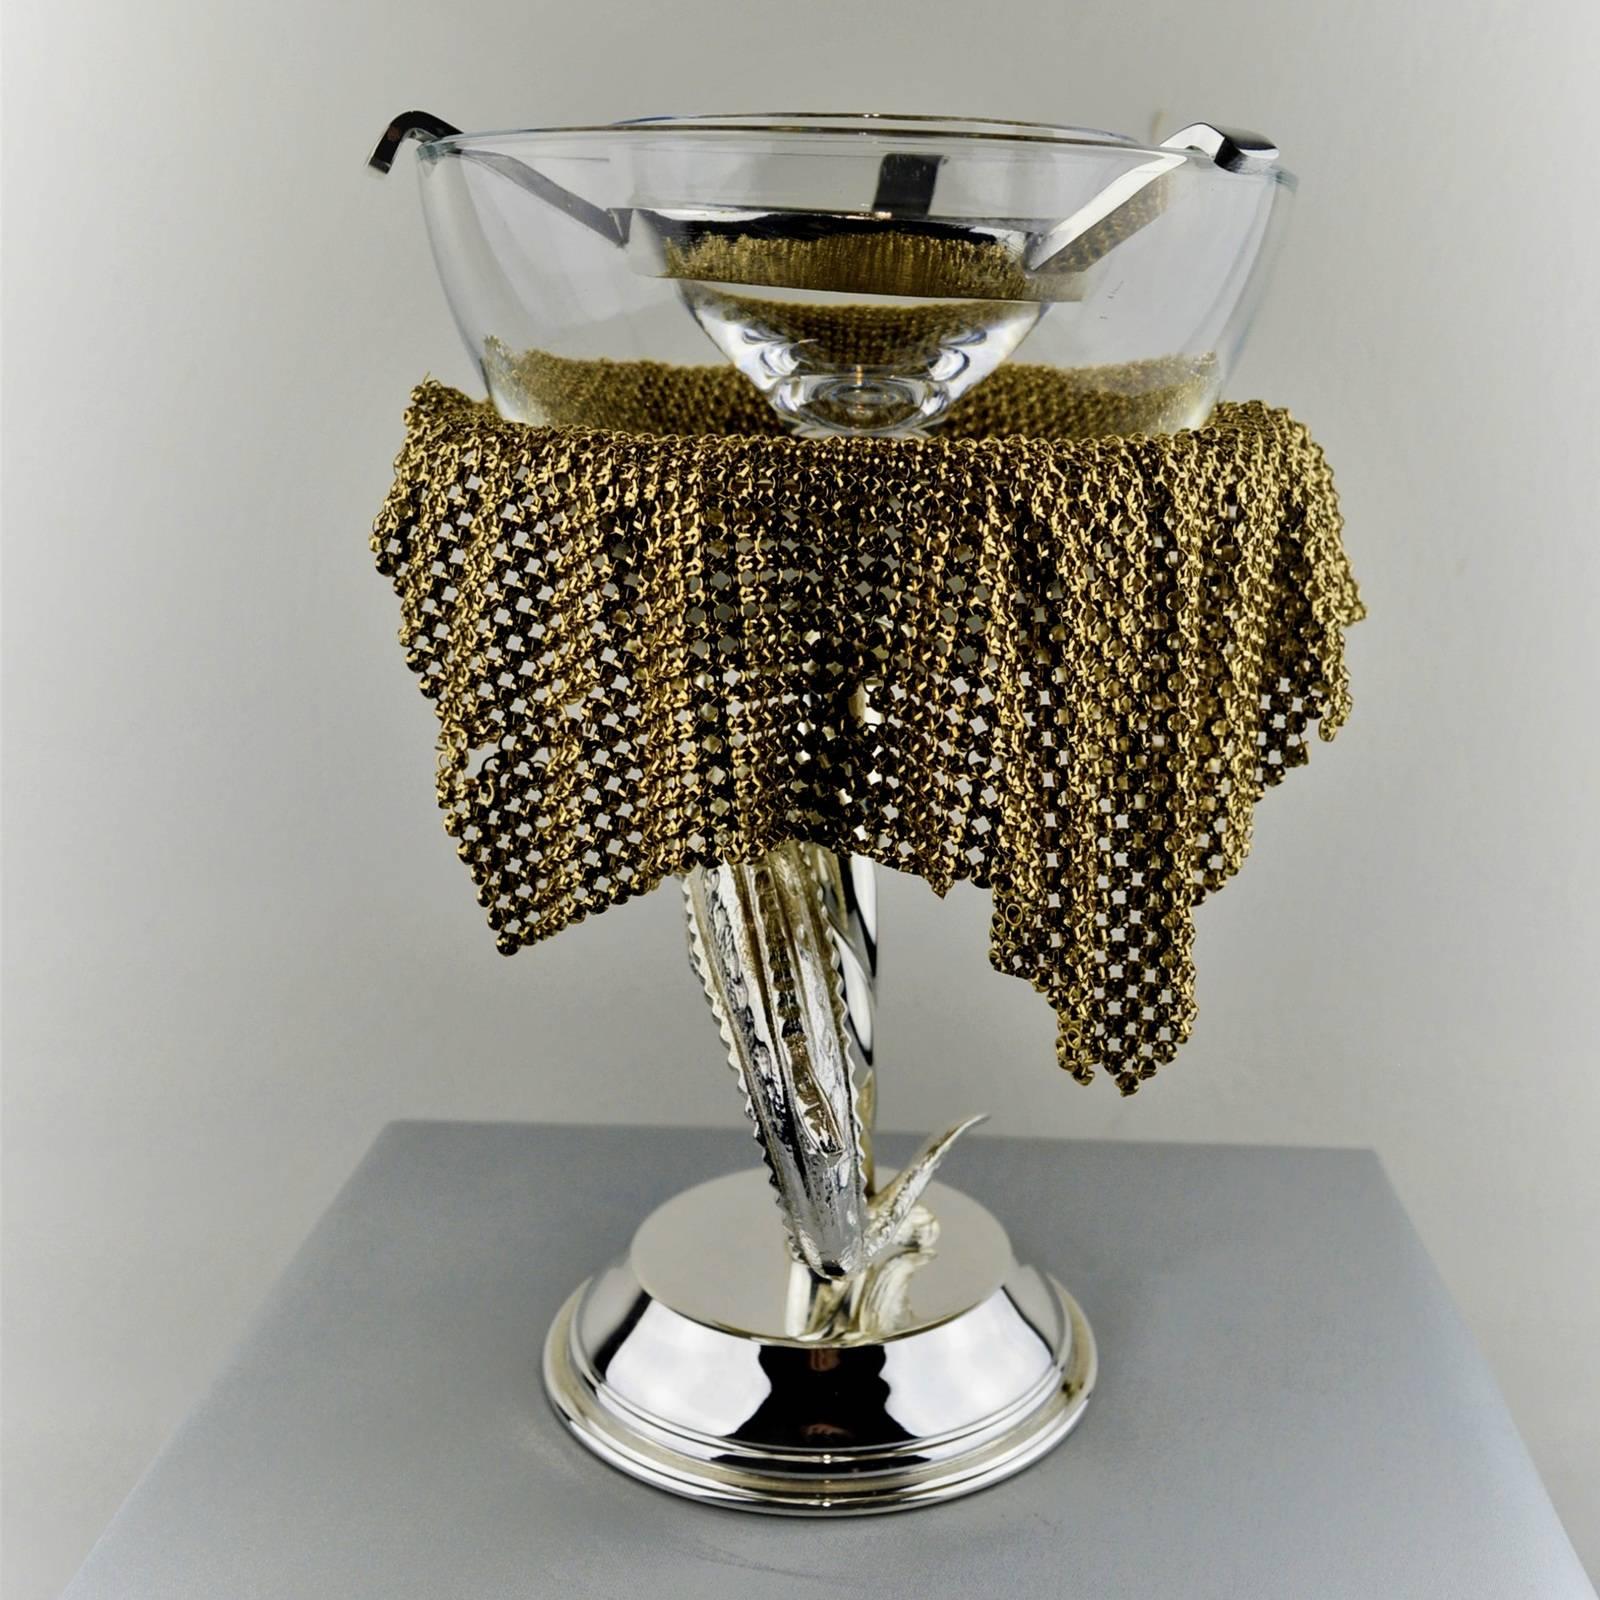 This stunning serving goblet is a celebration of exquisite craftsmanship and traditional decor. It is designed to serve caviar, thanks to its upper small cup, equipped with a small metal spoon, resting inside a larger one to be filled with chipped